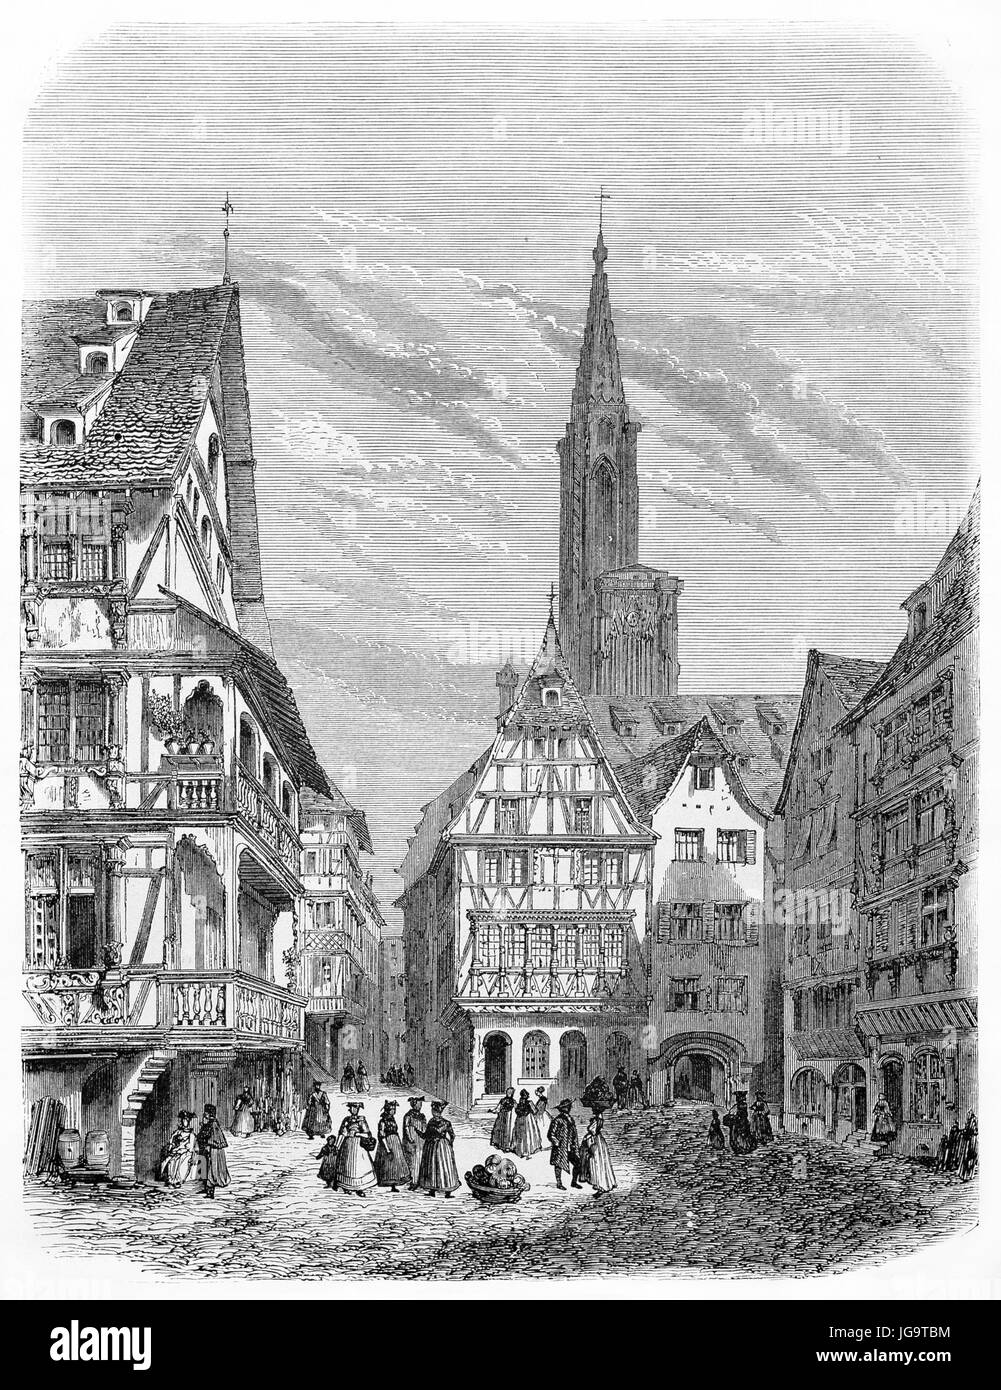 Strasbourg old town Black and White Stock Photos & Images - Alamy